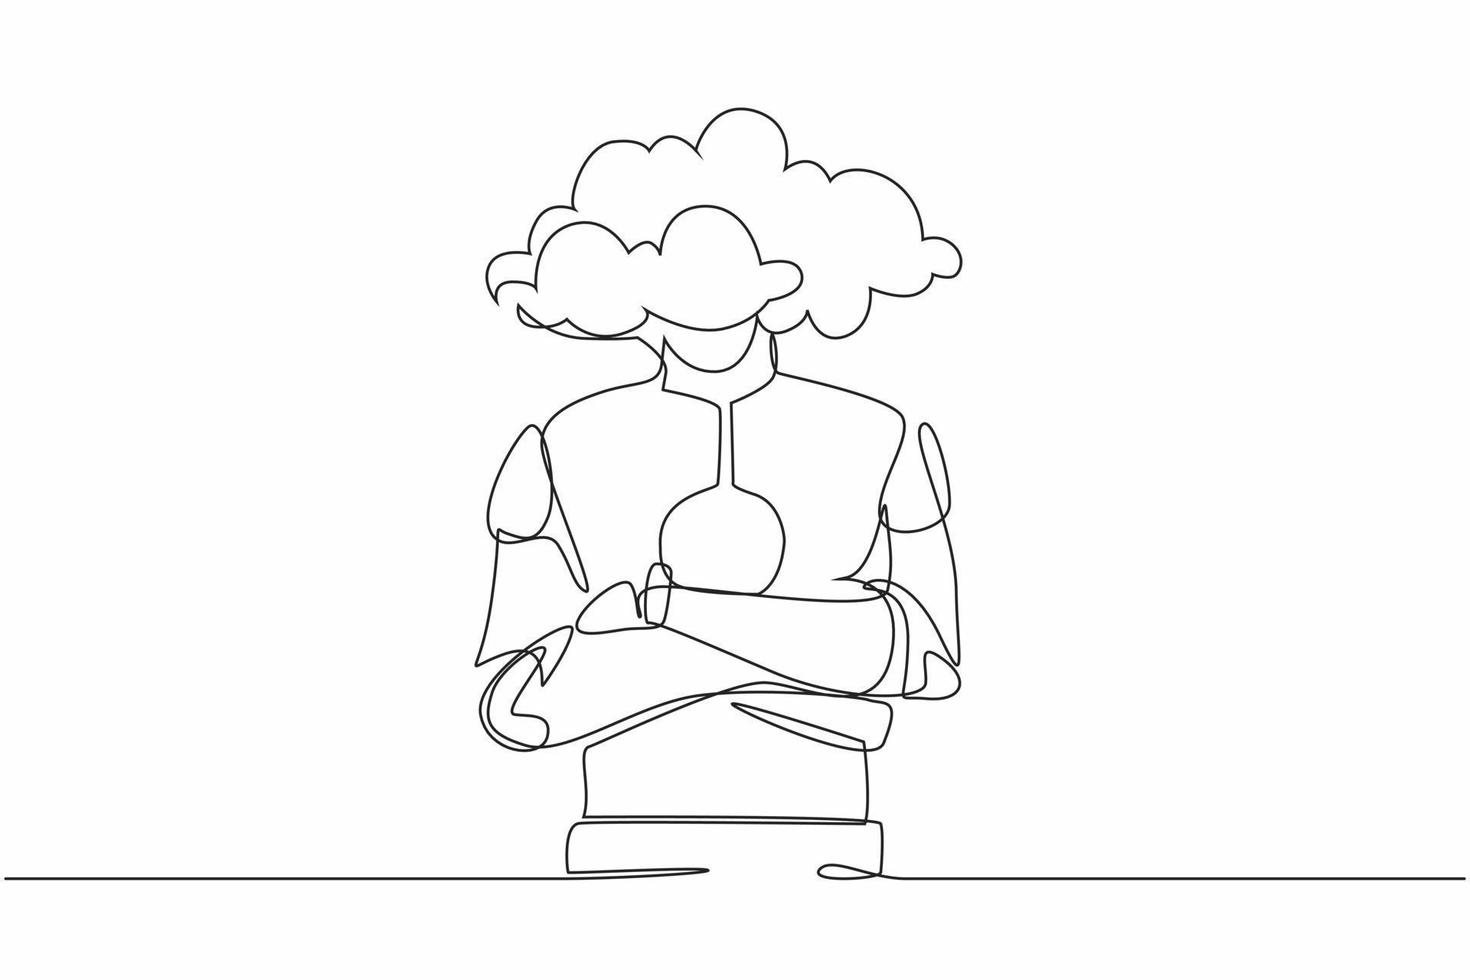 Continuous one line drawing cloud head robot. Robotic with empty head and cloud instead. Humanoid robot cybernetic organism. Future robotic development. Single line design vector graphic illustration